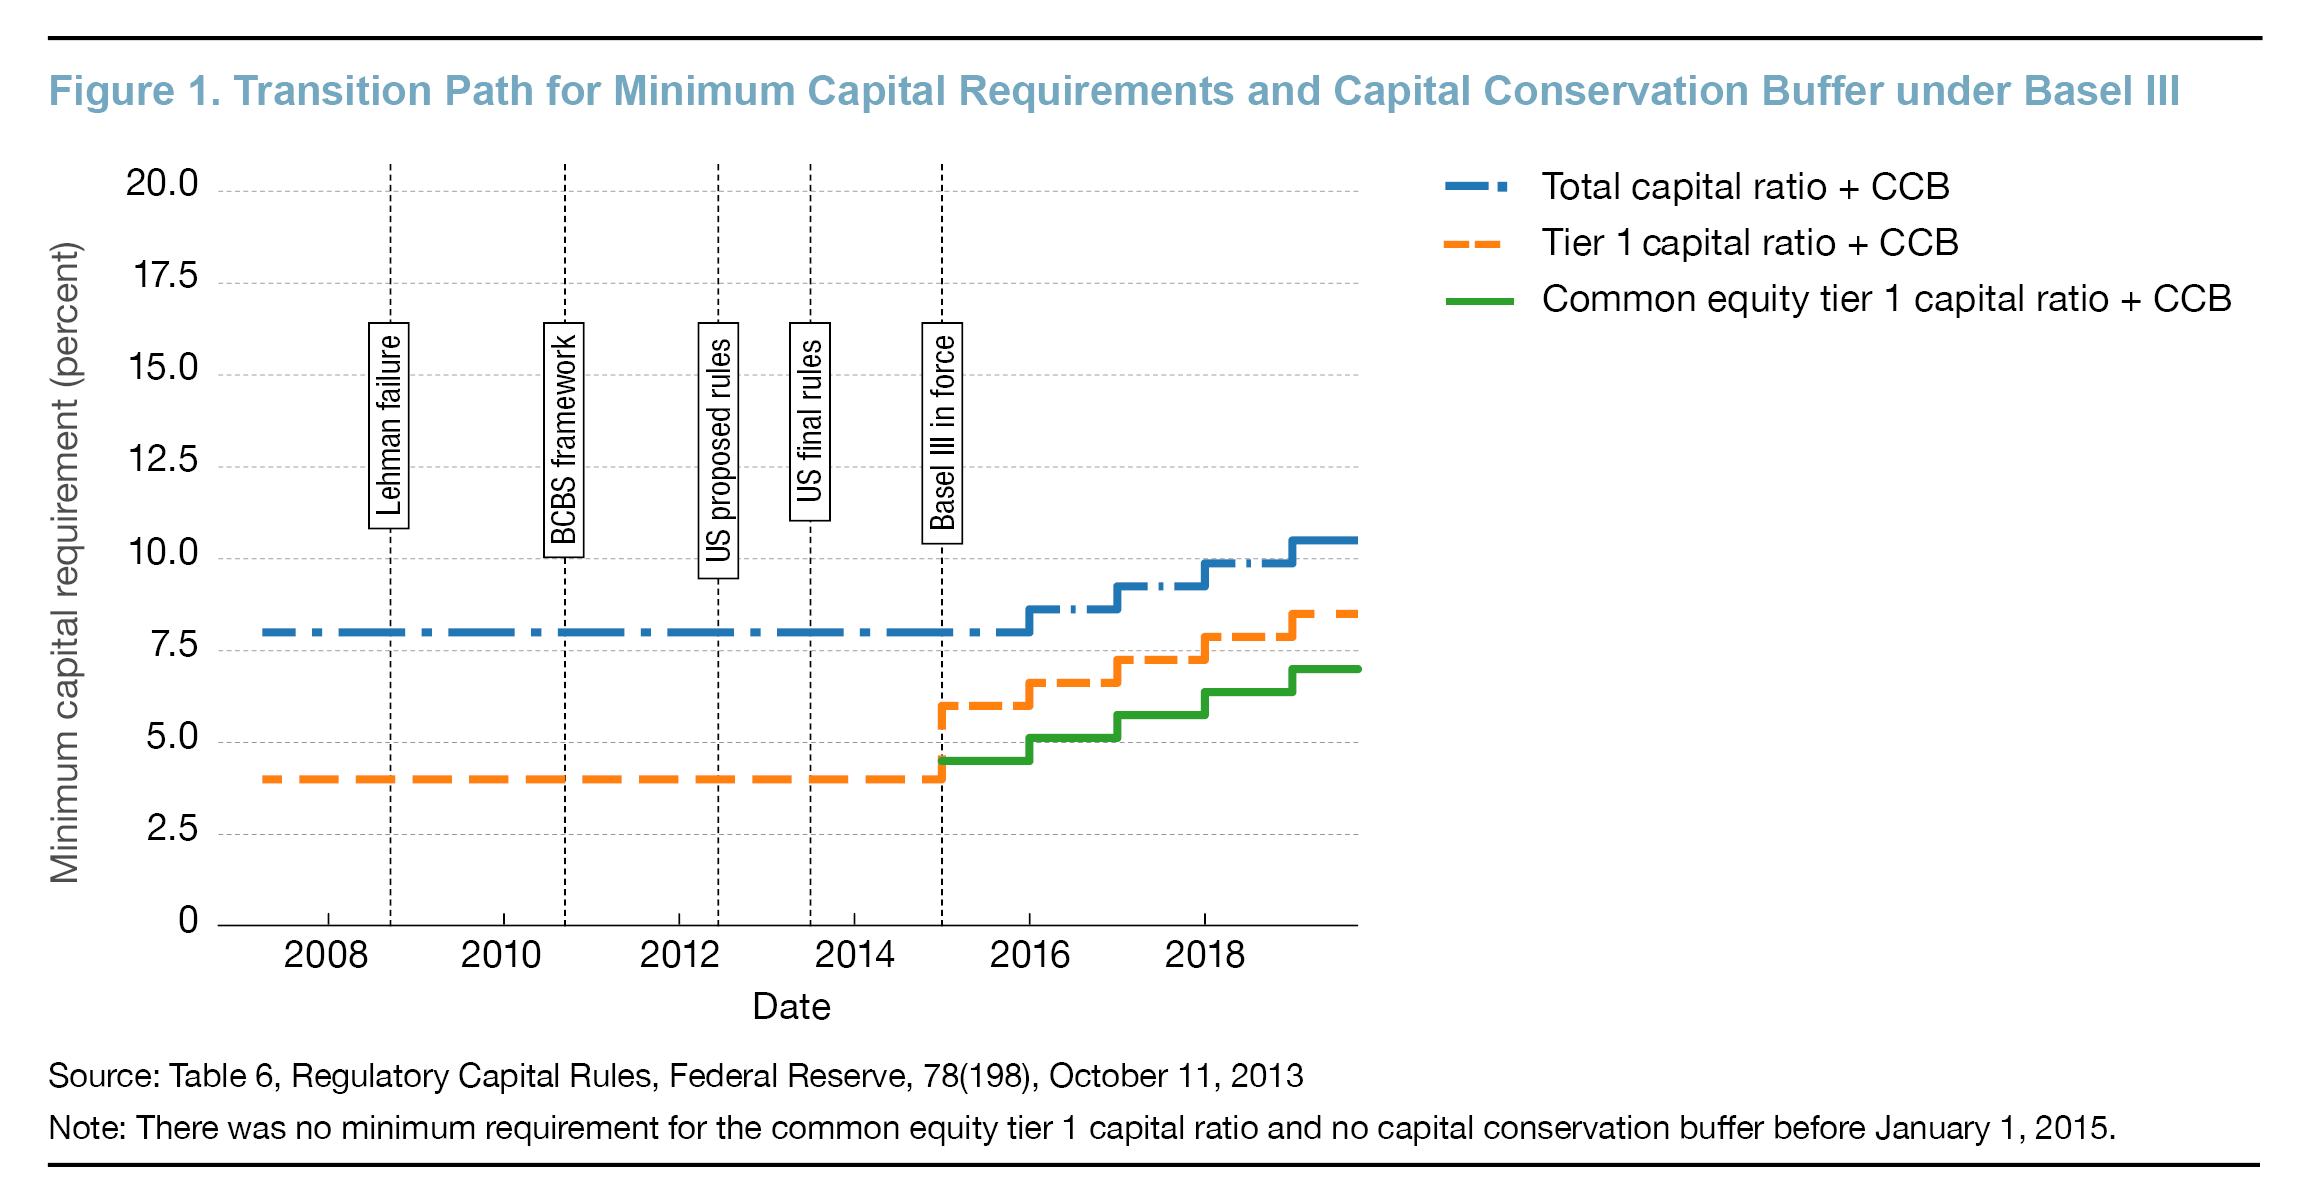 Figure 1. Transition Path for Minimum Capital Requirements and Capital Conservation Buffer under Basel III